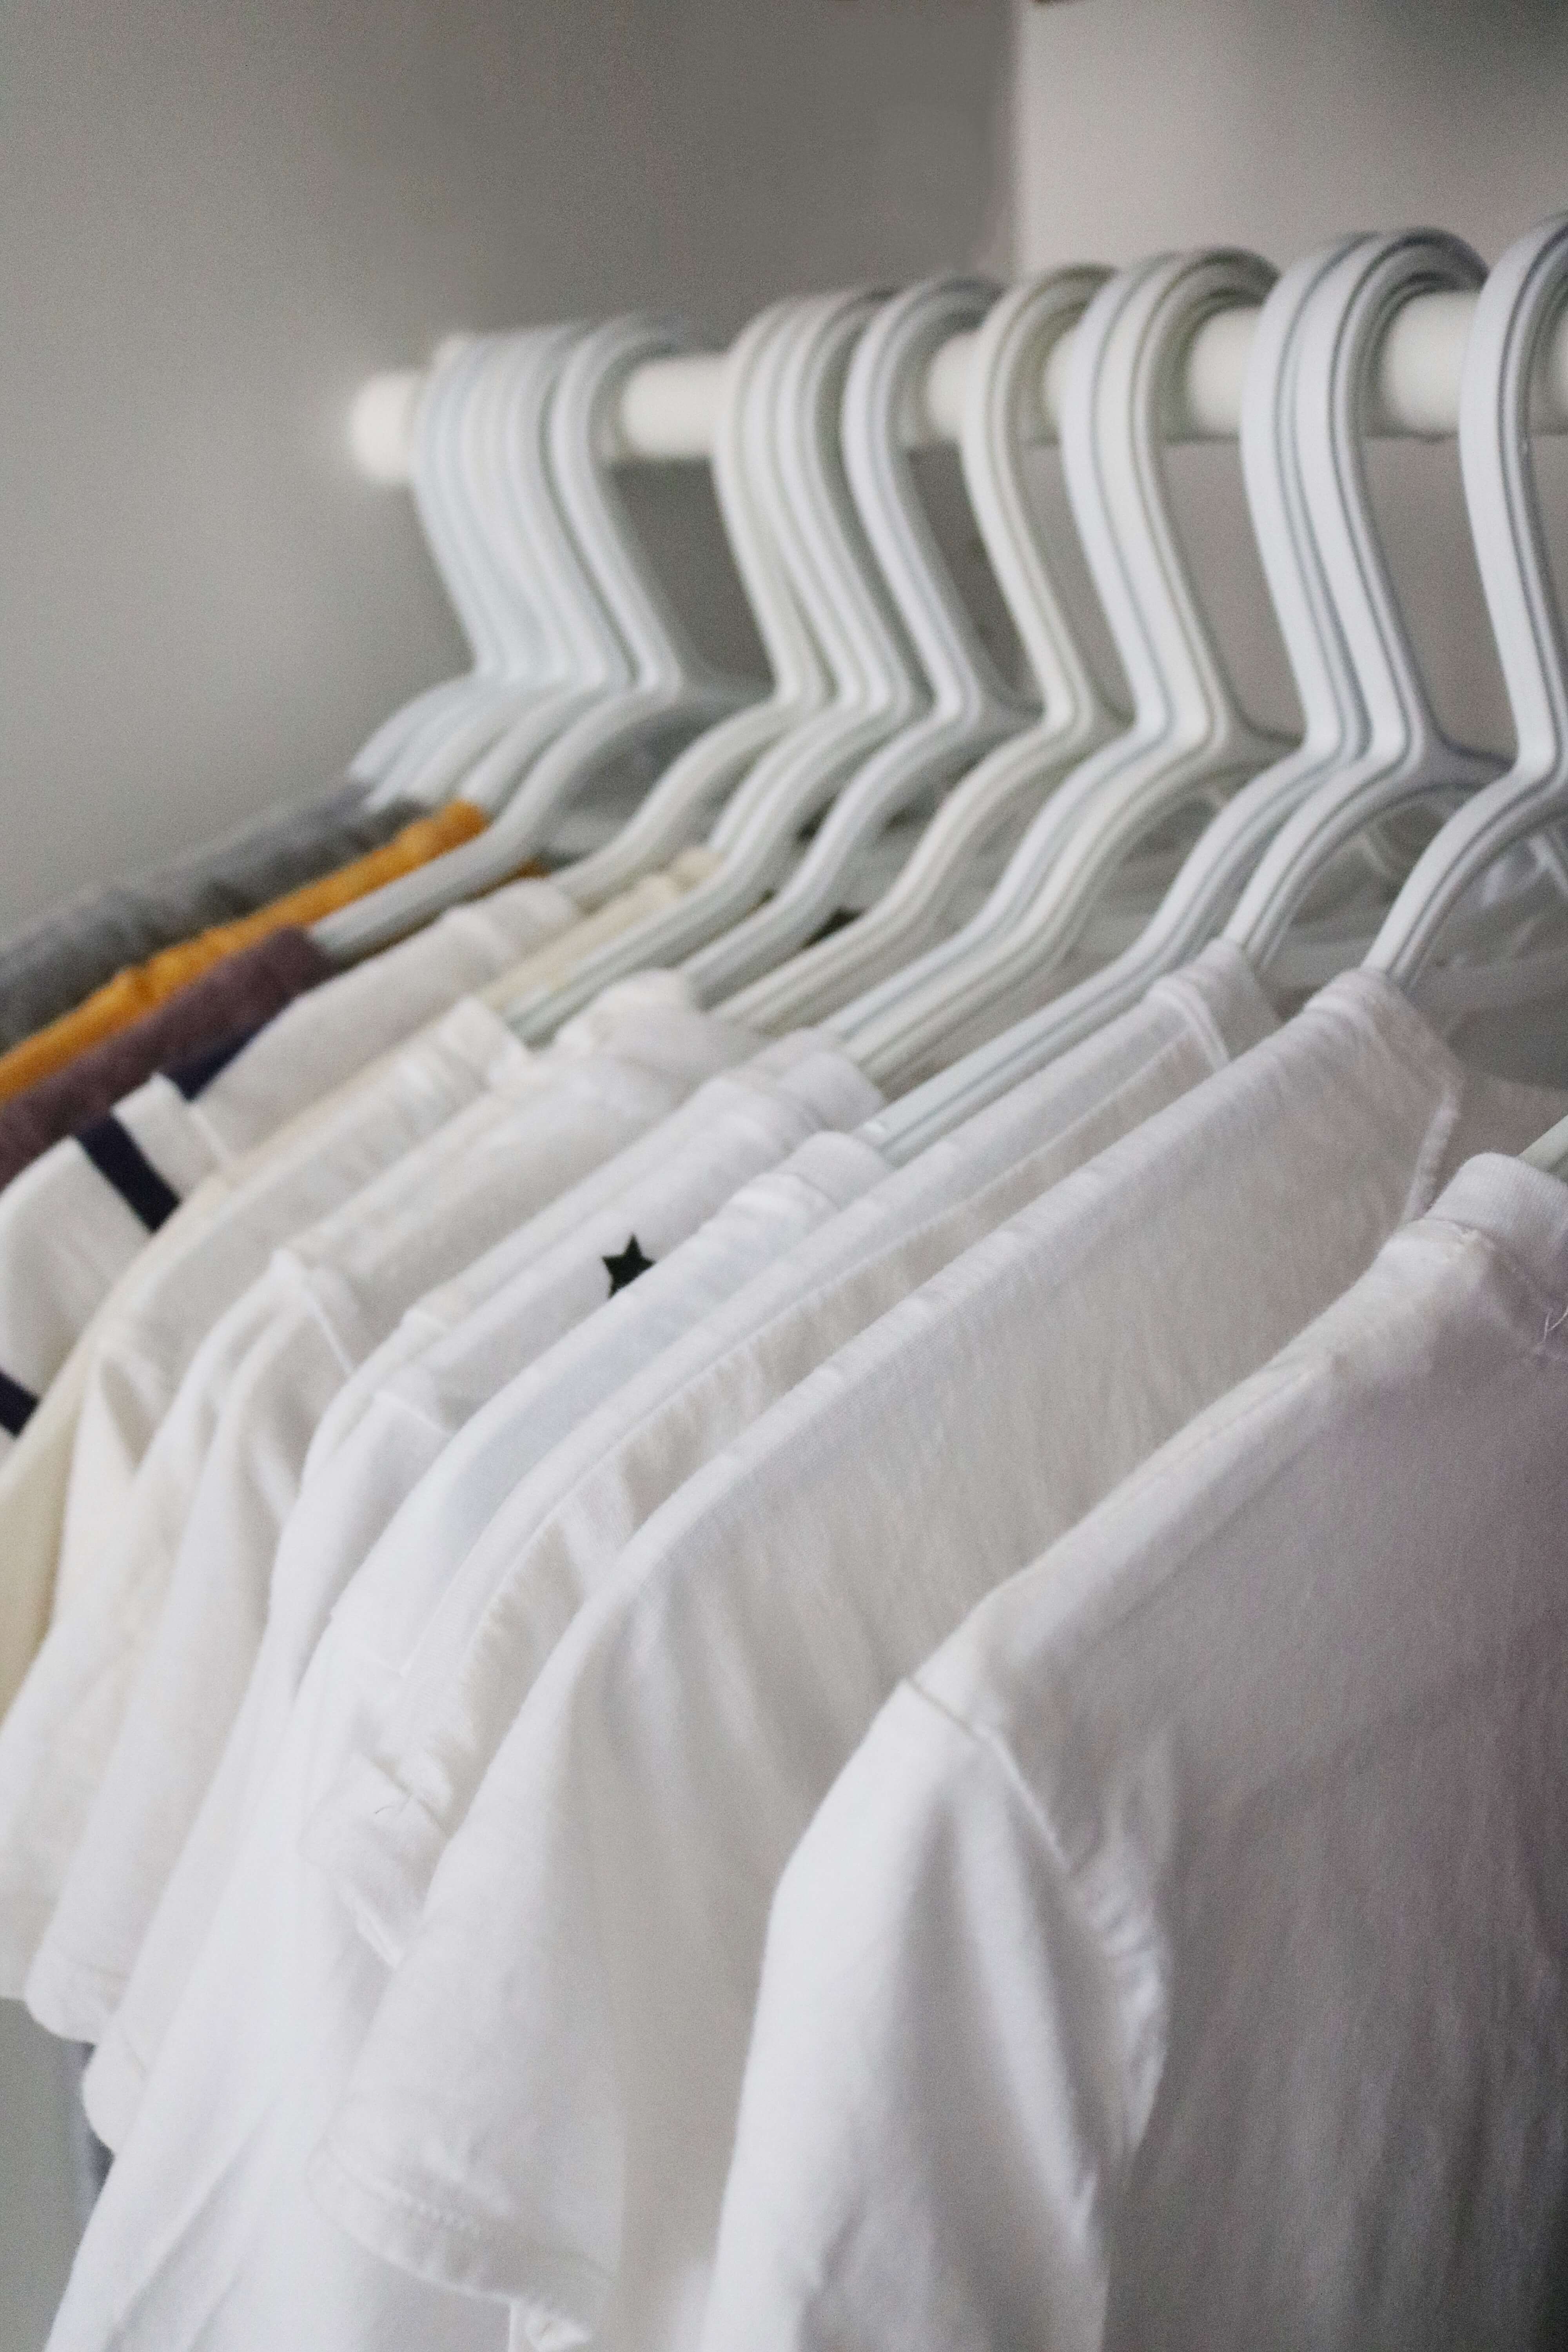 How to build a capsule wardrobe; what is a capsule wardrobe; wardrobe basics; sparkleshinylove